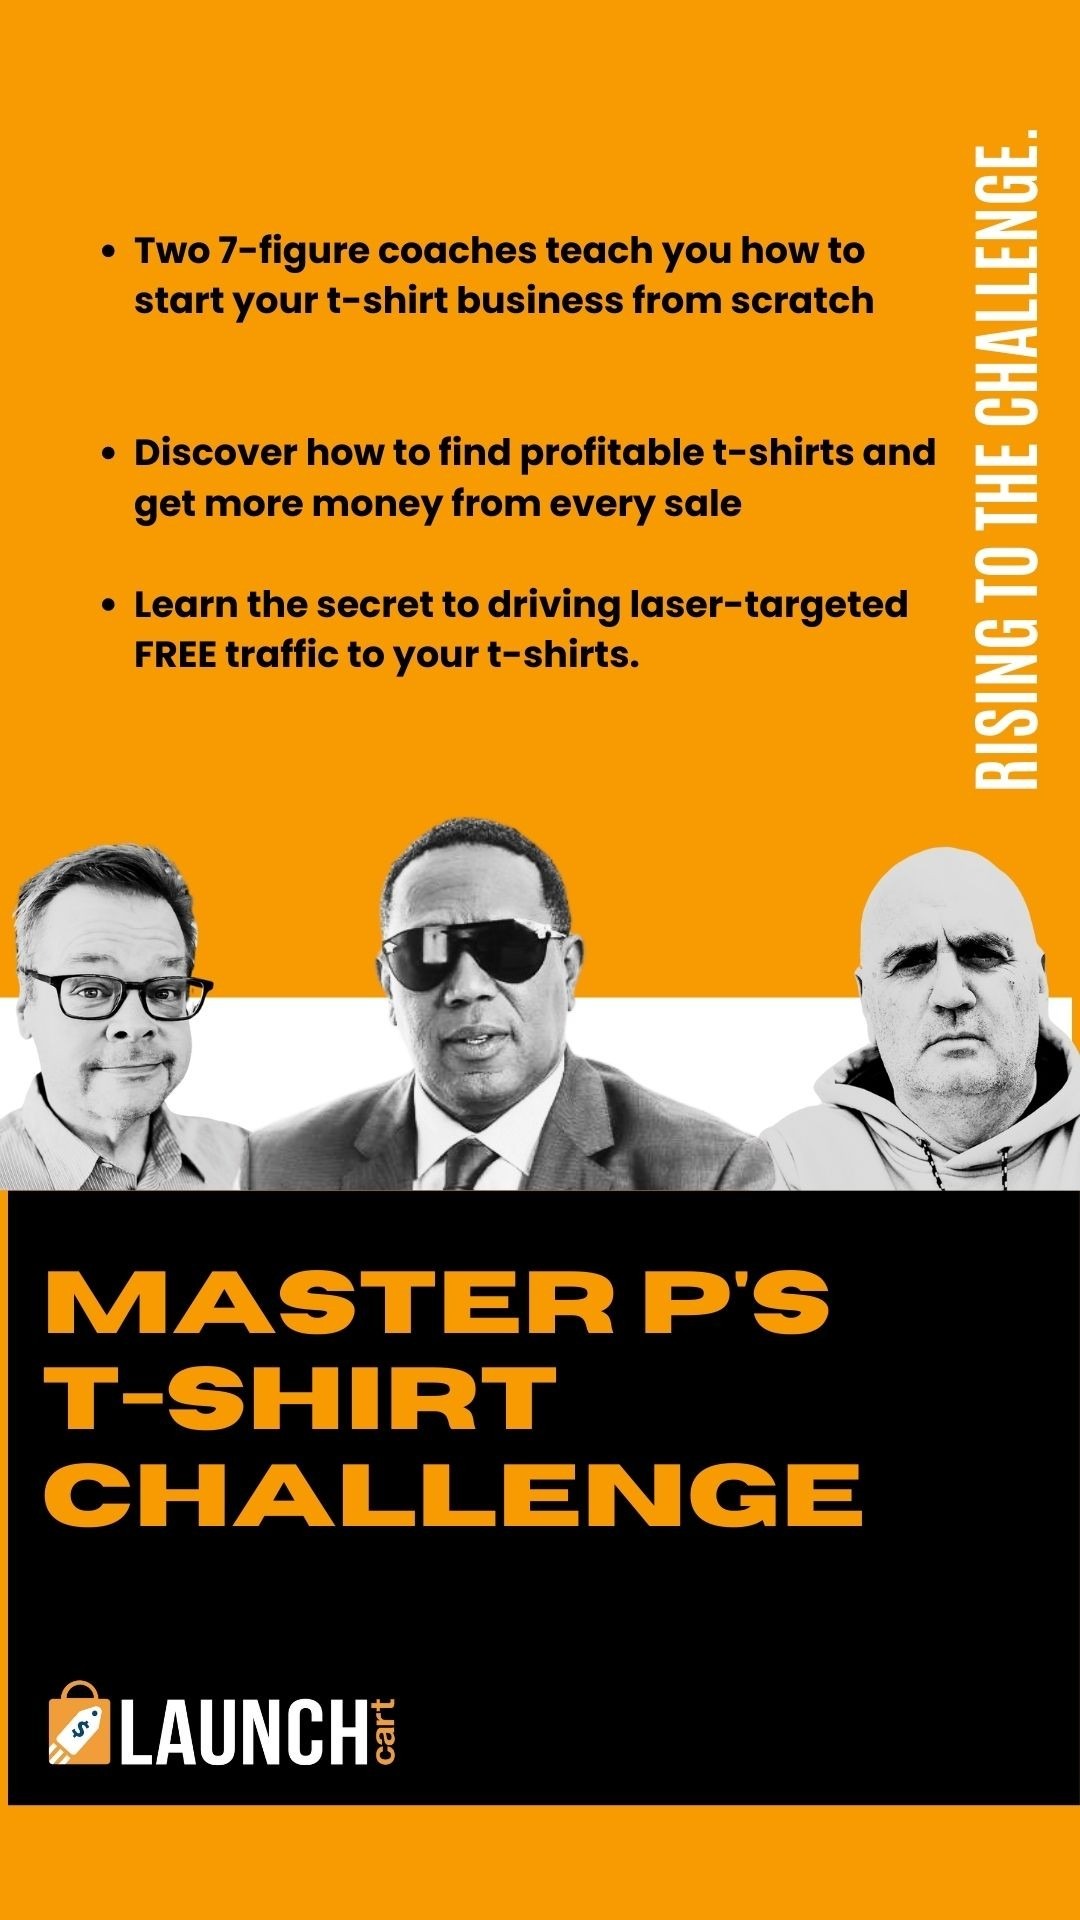 Want to start a T-Shirt business? Master P’s new challenge can help